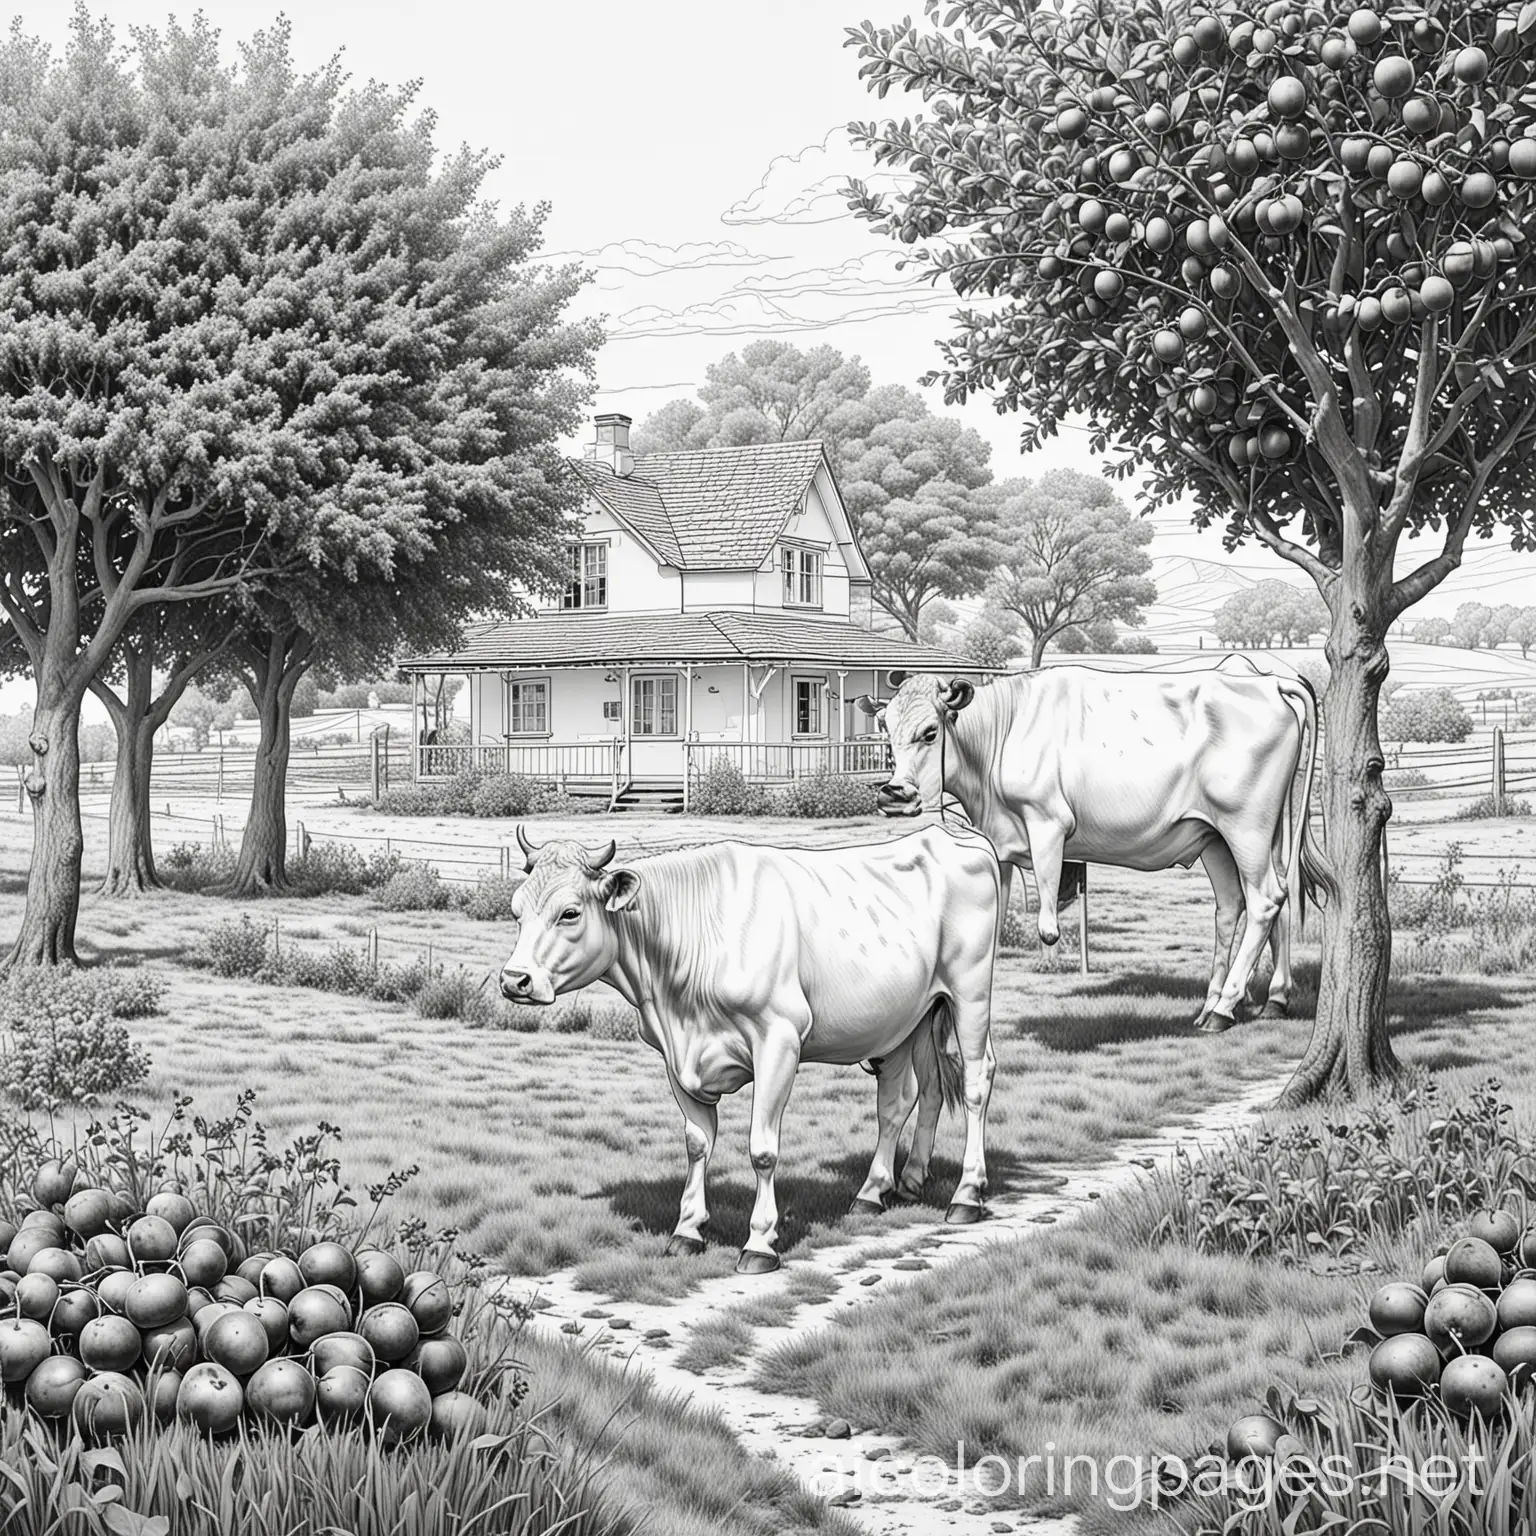 Plum fruits and plum tress, farm house, Cow eating grass, Colouring Page, black and white, line art, white background, Simplicity, Ample White Space. The background of the colouring page is plain white to make it easy for young children to colour within the lines. The outlines of all the subjects are easy to distinguish, making it simple for kids to colour without too much difficulty., Coloring Page, black and white, line art, white background, Simplicity, Ample White Space. The background of the coloring page is plain white to make it easy for young children to color within the lines. The outlines of all the subjects are easy to distinguish, making it simple for kids to color without too much difficulty